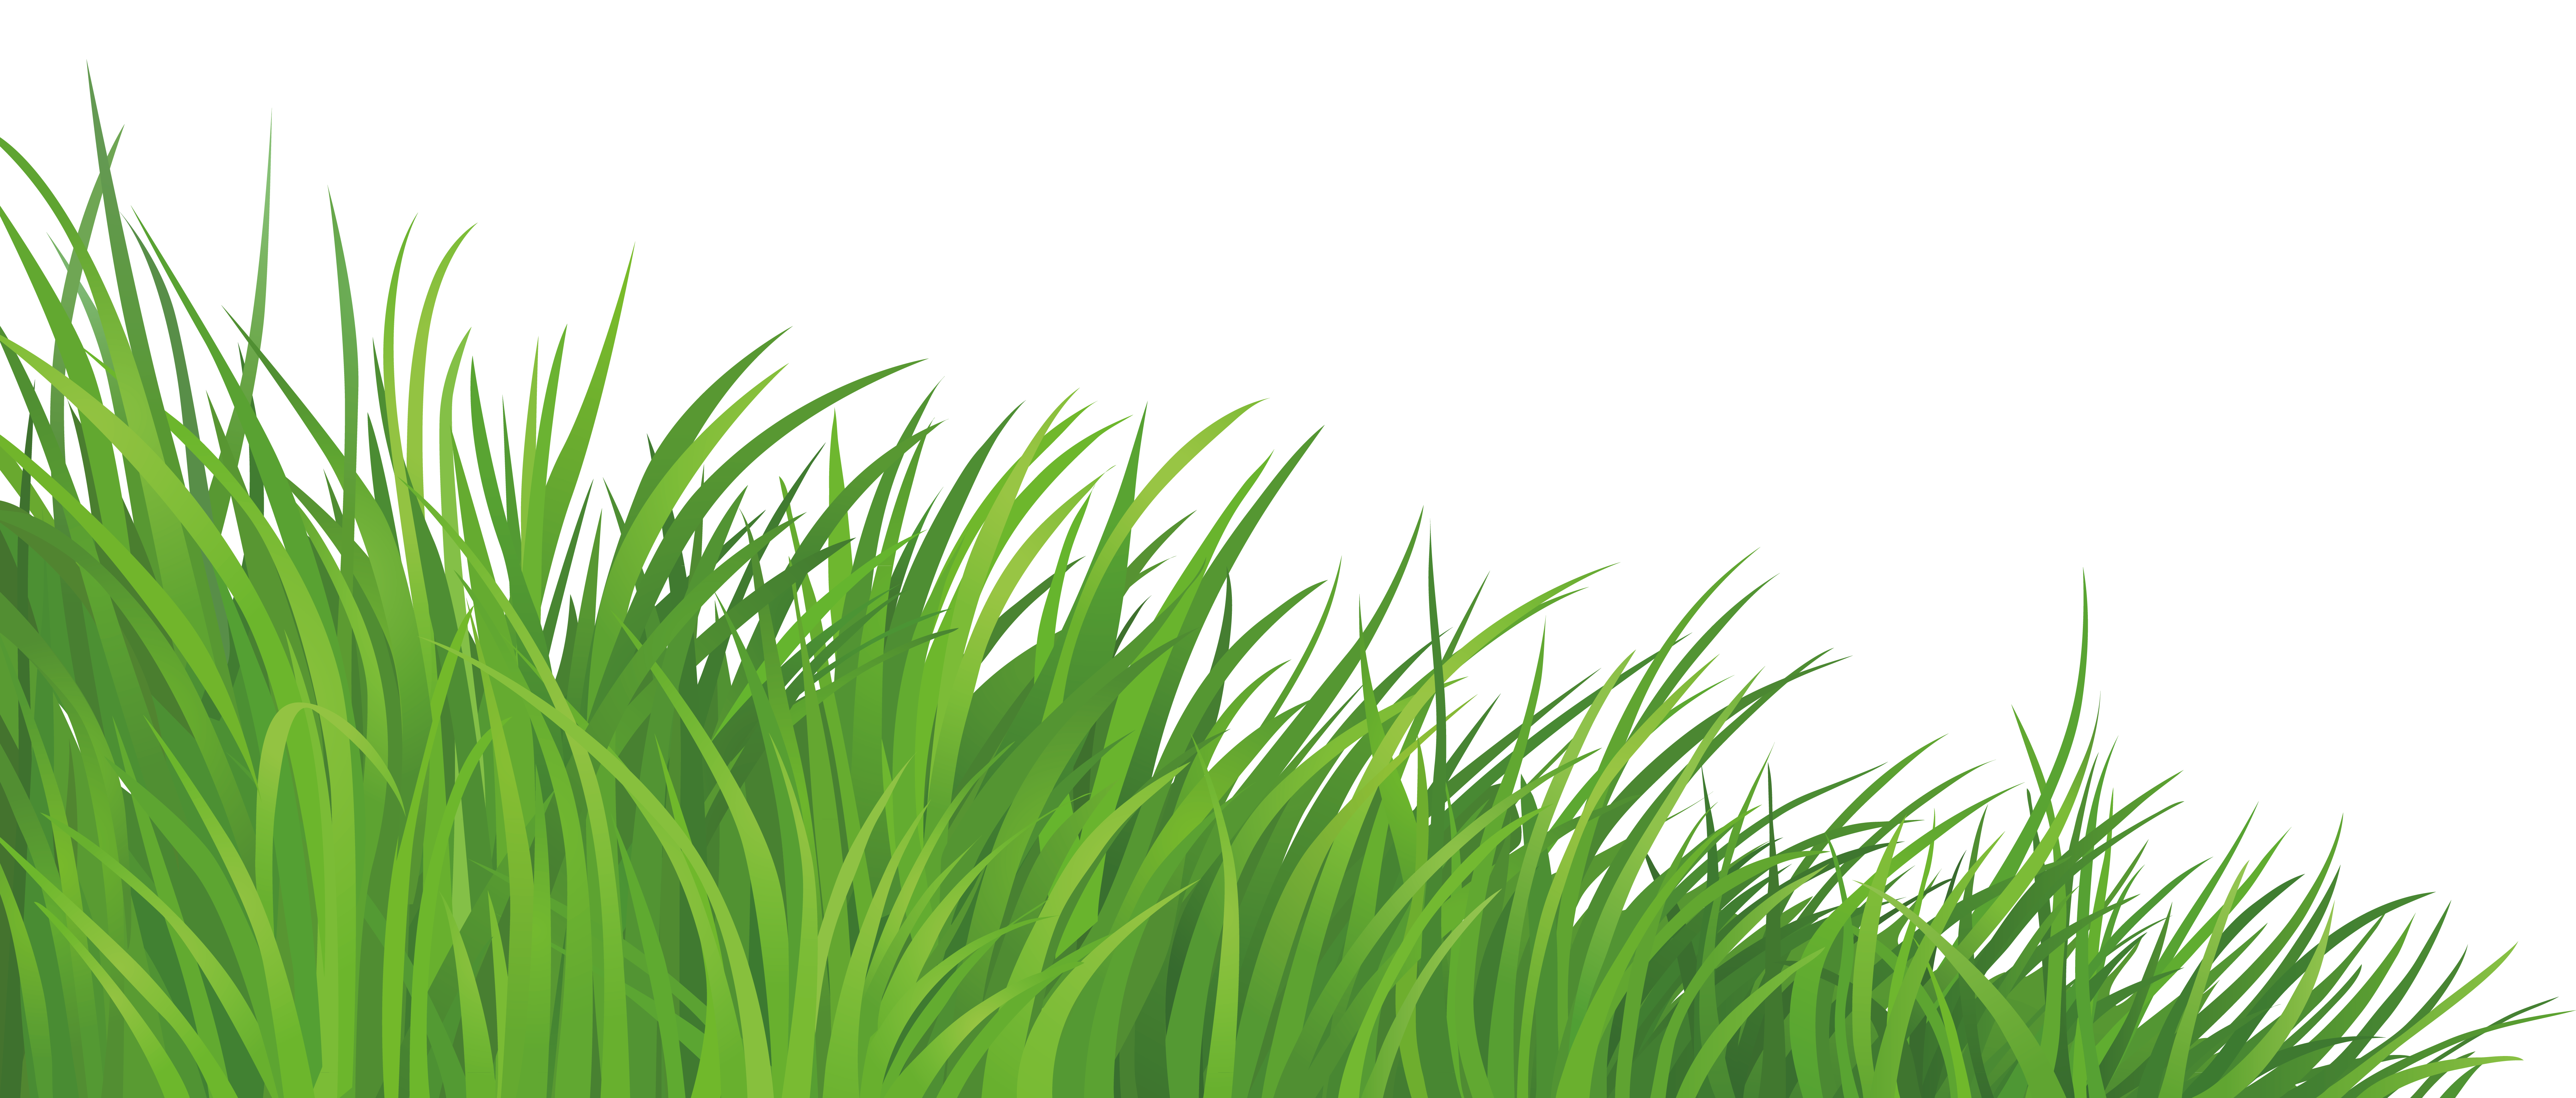 png clipart grass - photo #6